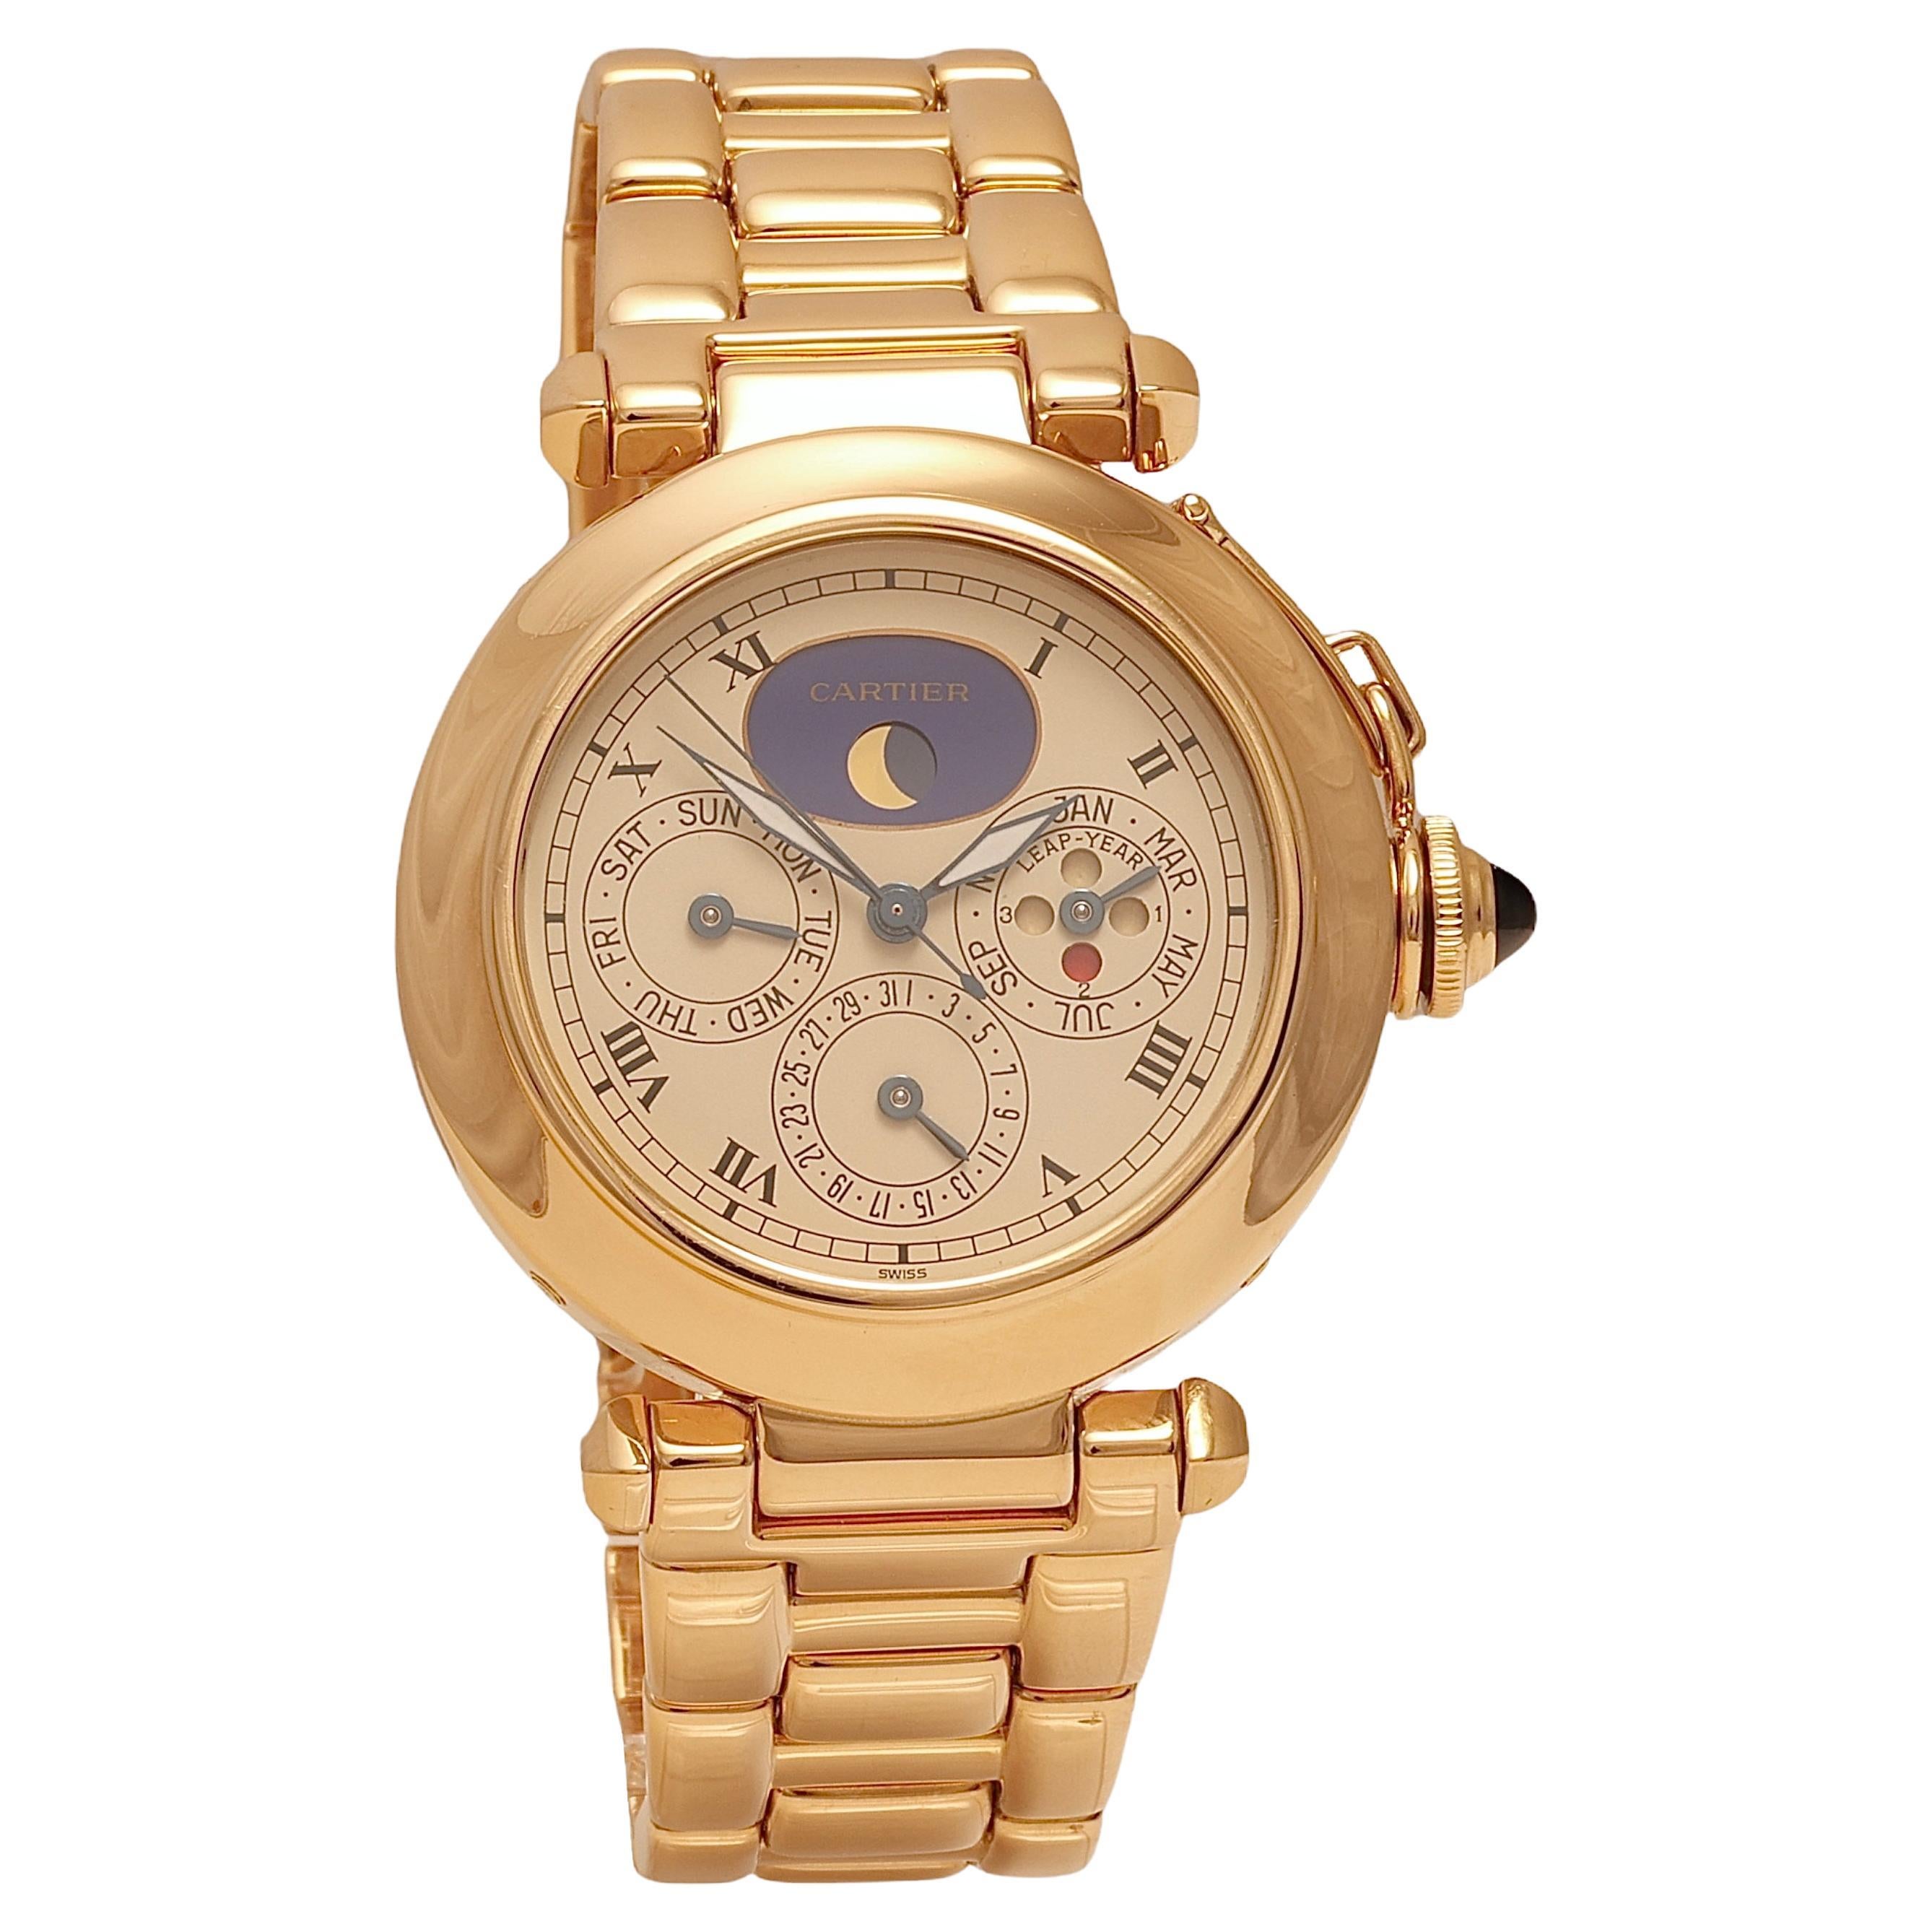 18 Kt Cartier Pasha Perpetual Calendar Wrist Watch, Day Date Month Moon Phase